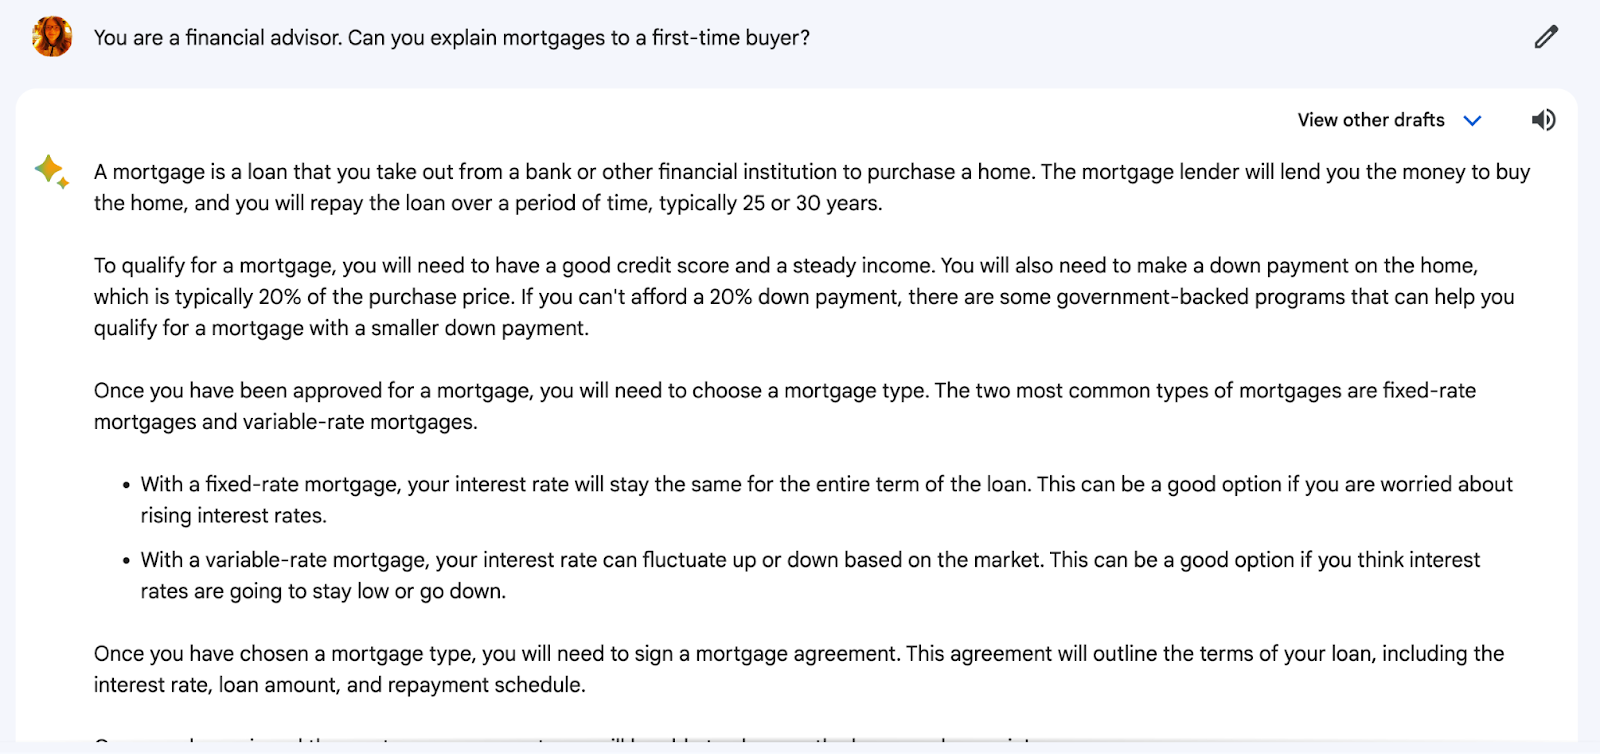 Bard's response to "You are a financial advisor. Can you explain mortgages to a first-time buyer?" prompt